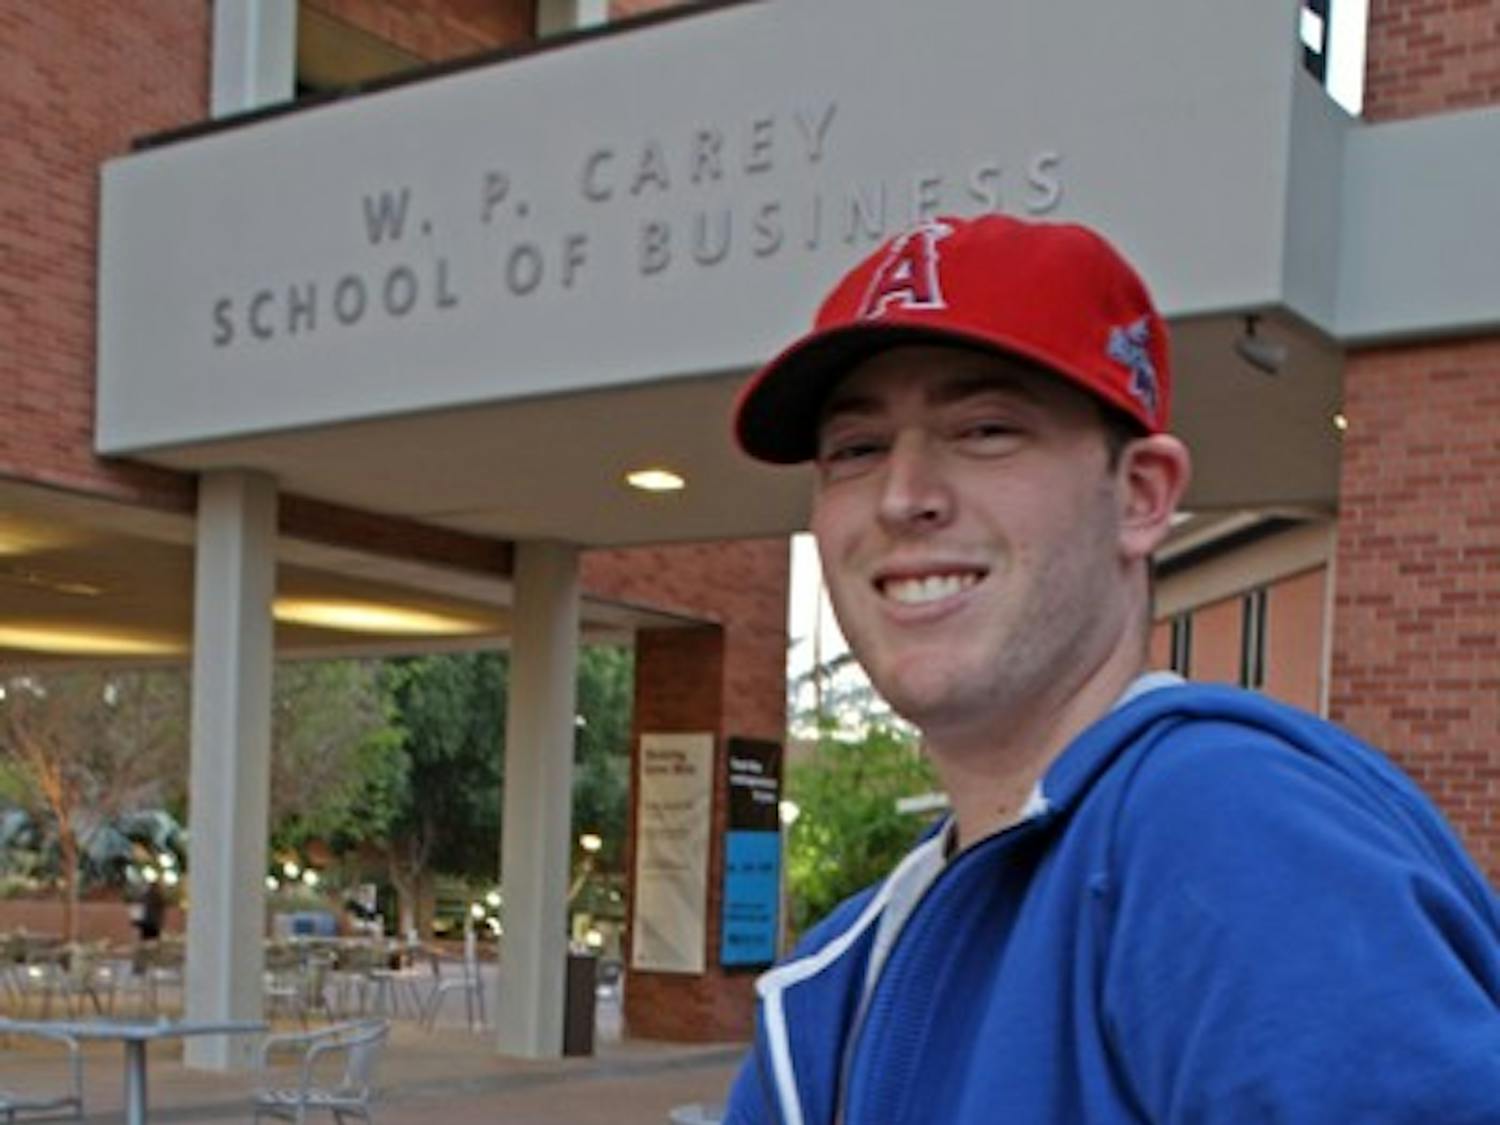 Economics senior Orry Night is graduating this May from the W.P. Carey School of Business. Night battled Hodgkin's lymphoma and went into remission last year. "I have grown exponentially from my experiences," he said. (Photo by Jessie Wardarski)